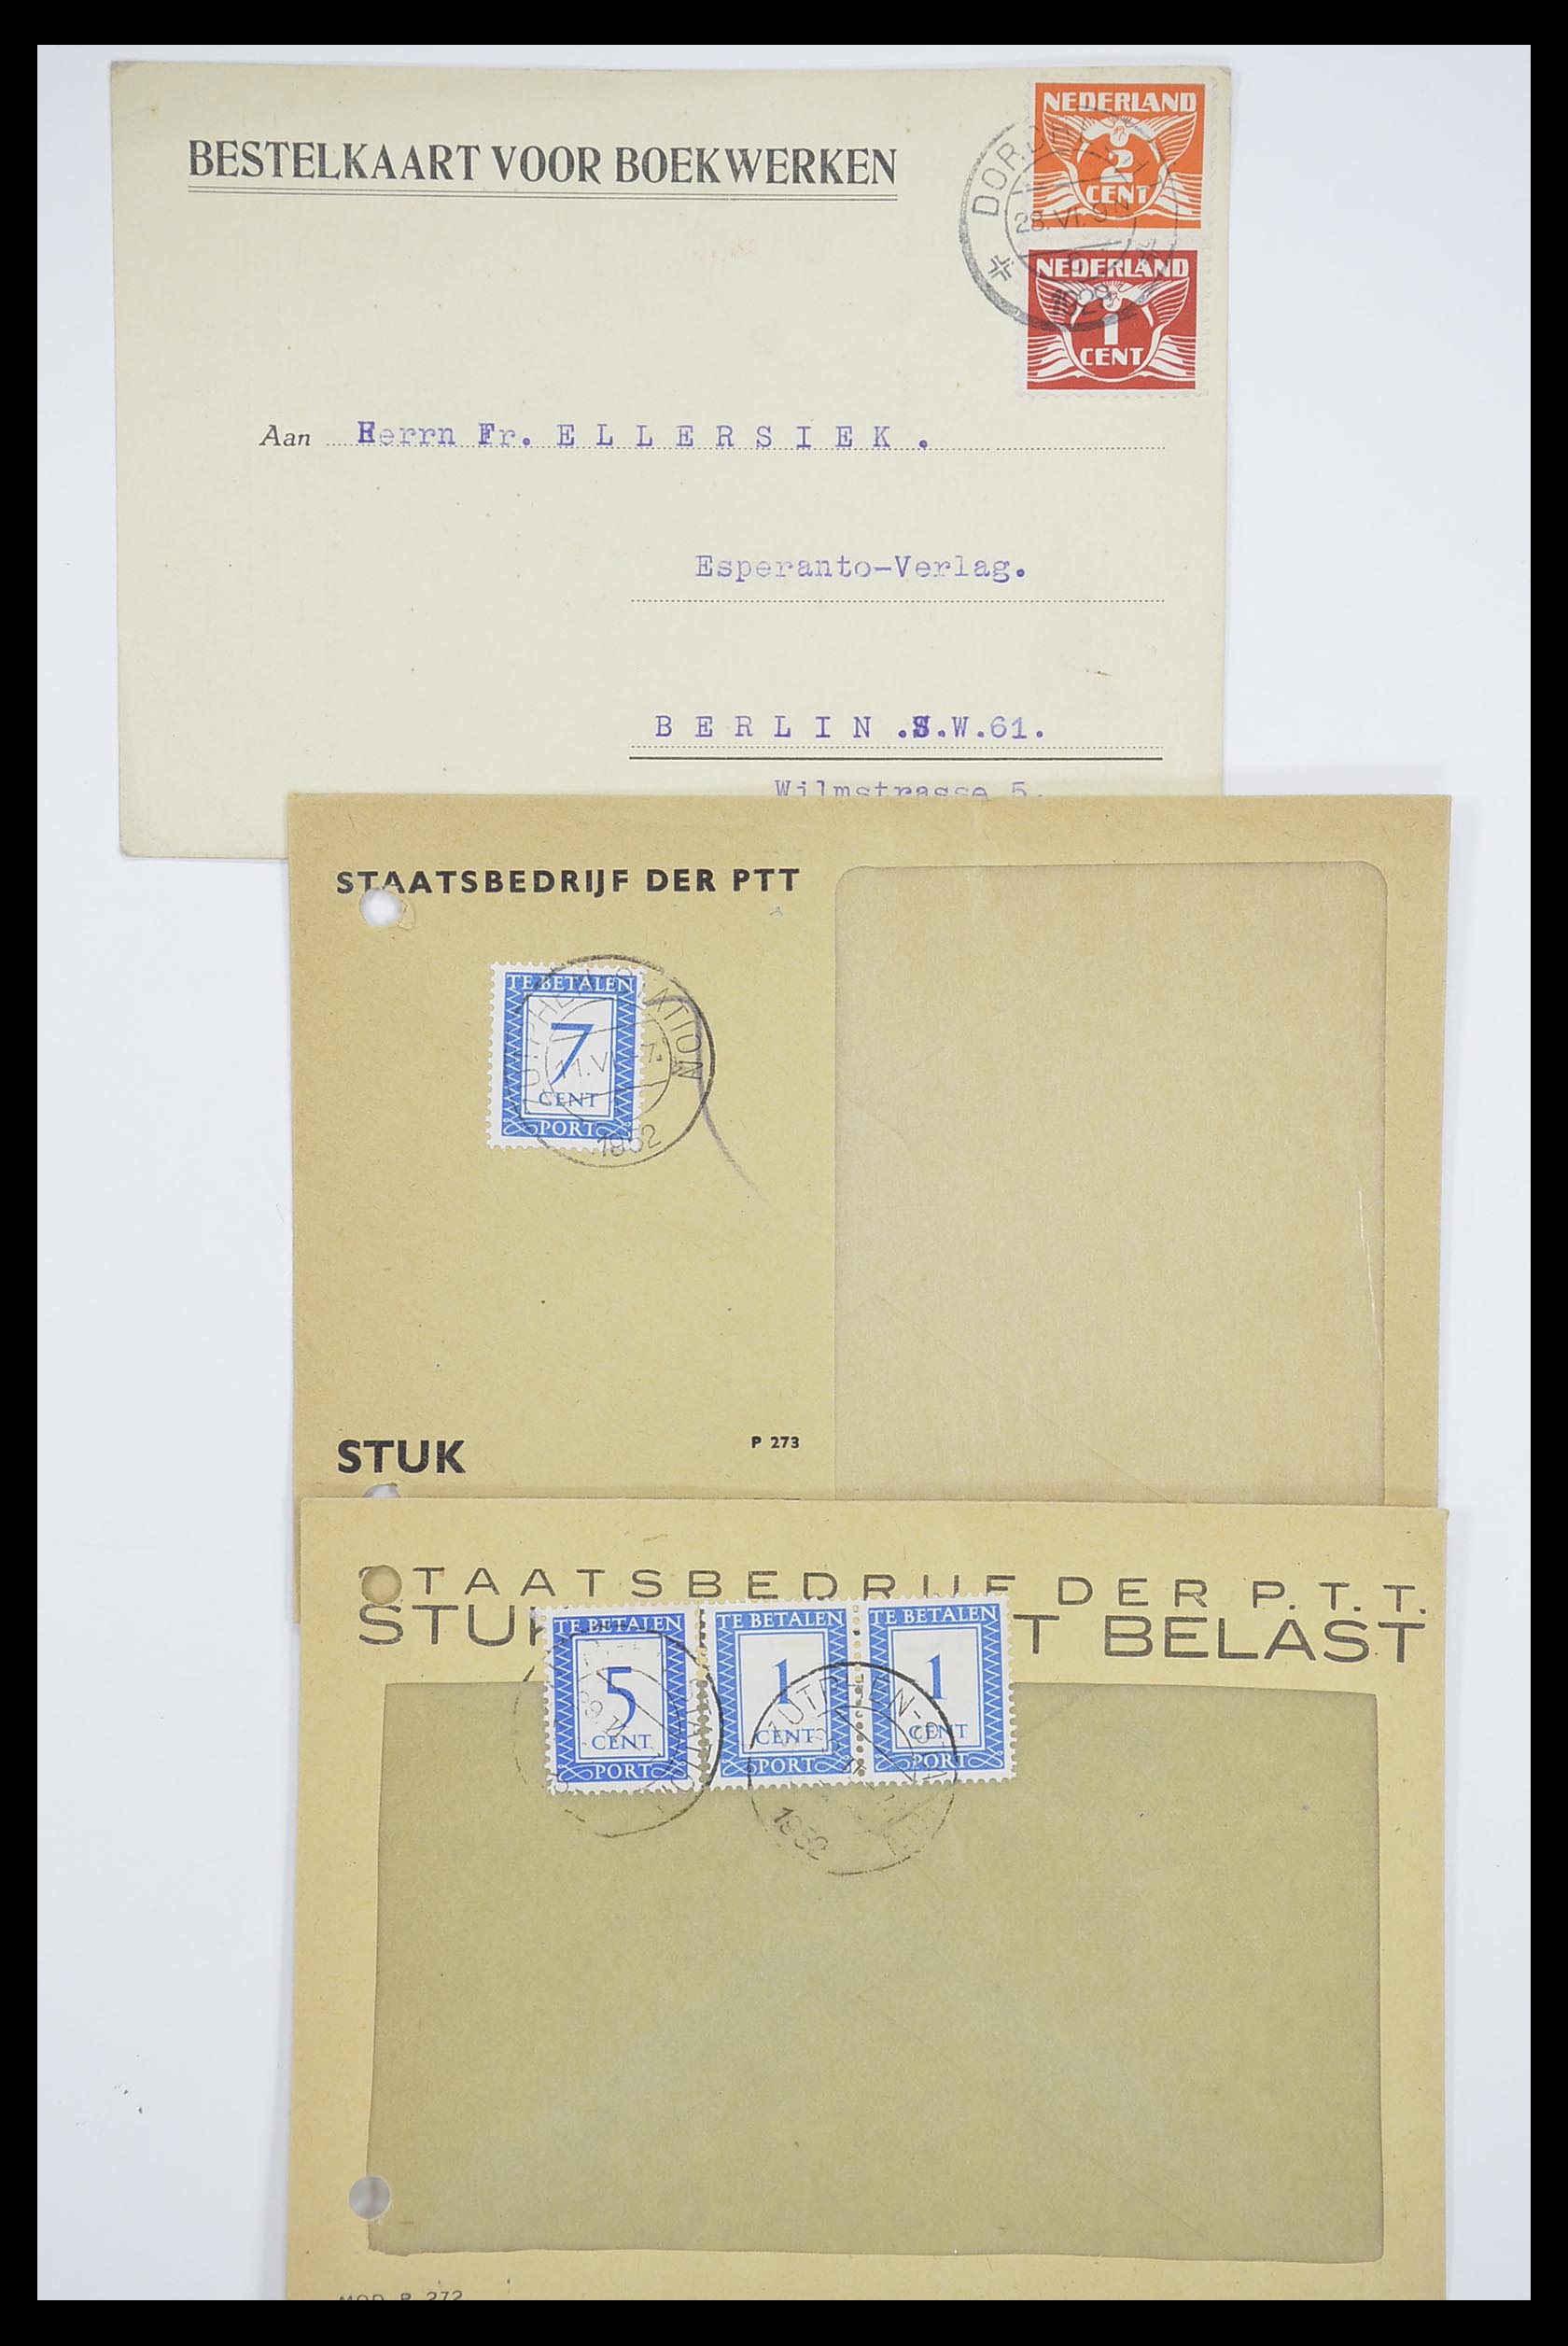 33536 227 - Stamp collection 33536 Netherlands covers 1800-1950.